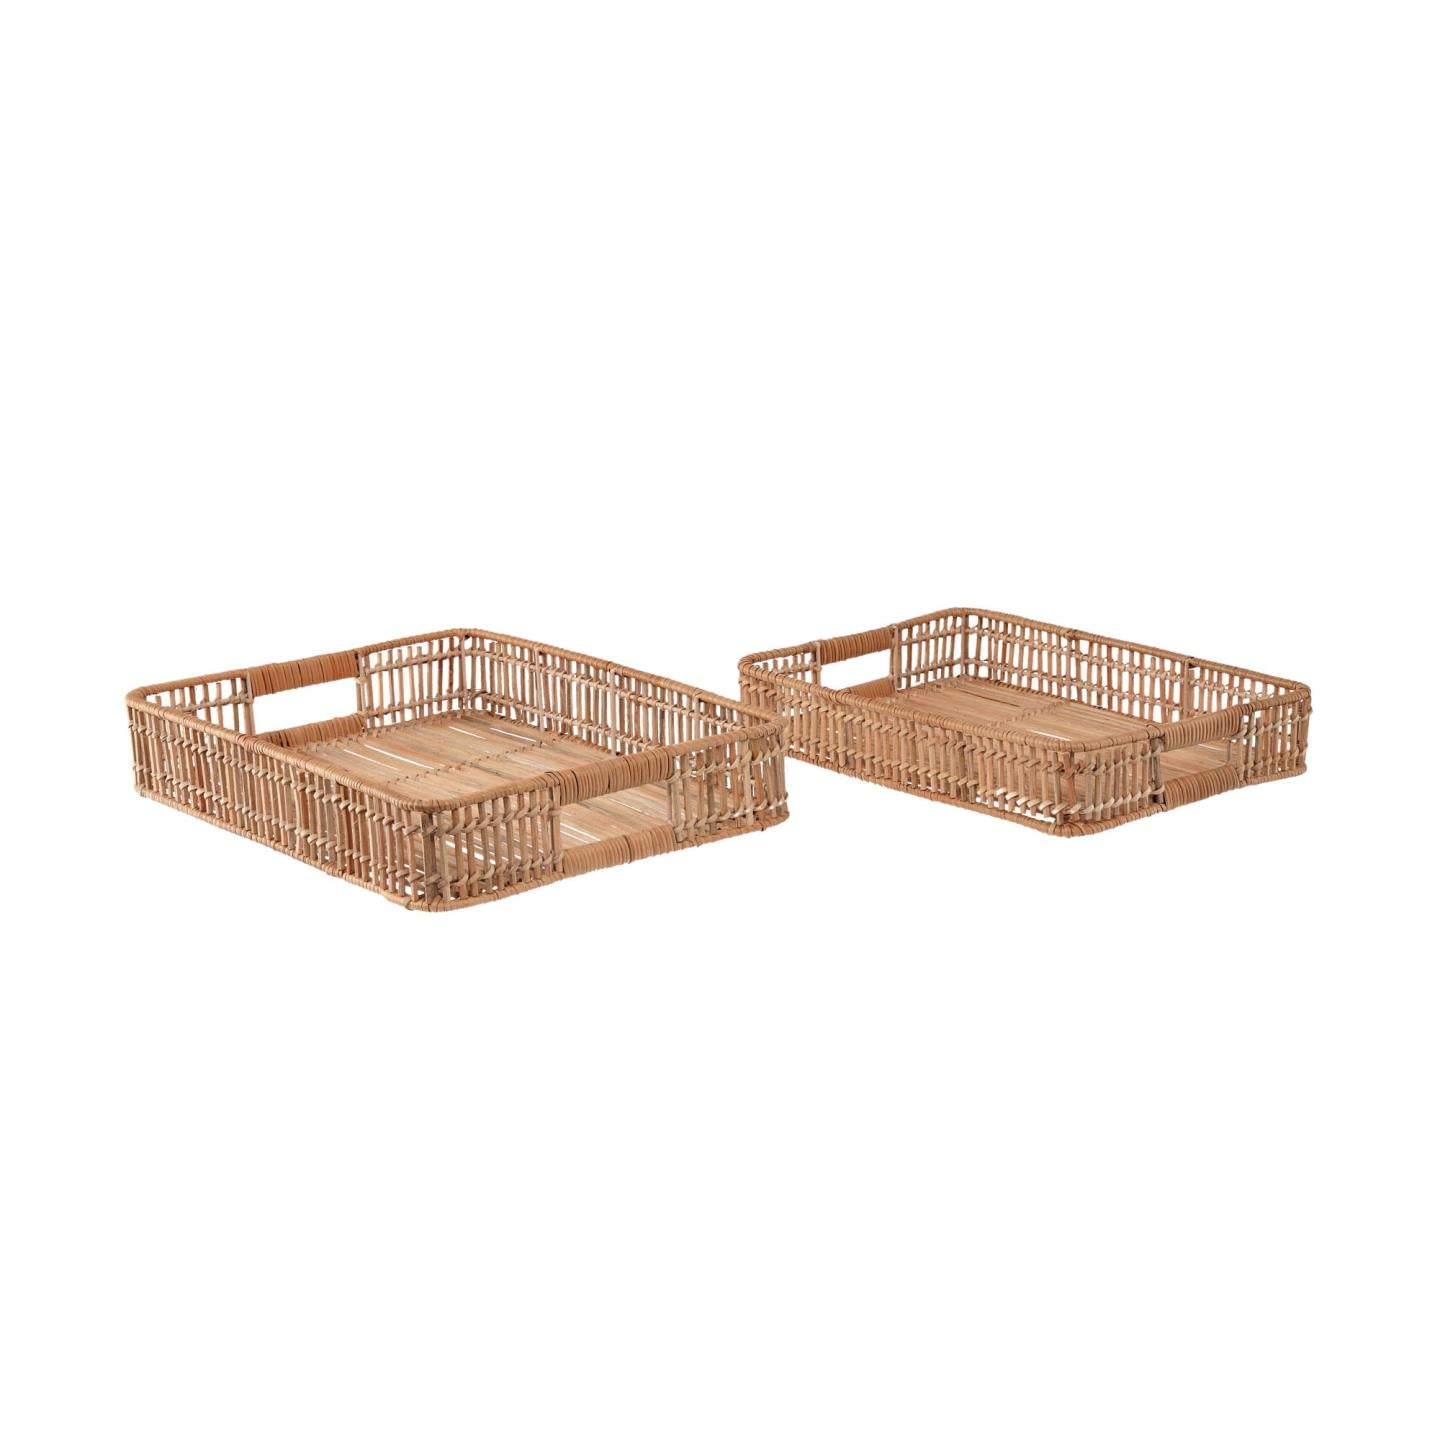 Coleenn set of 2 rectangular trays in 100% rattan with natural finish